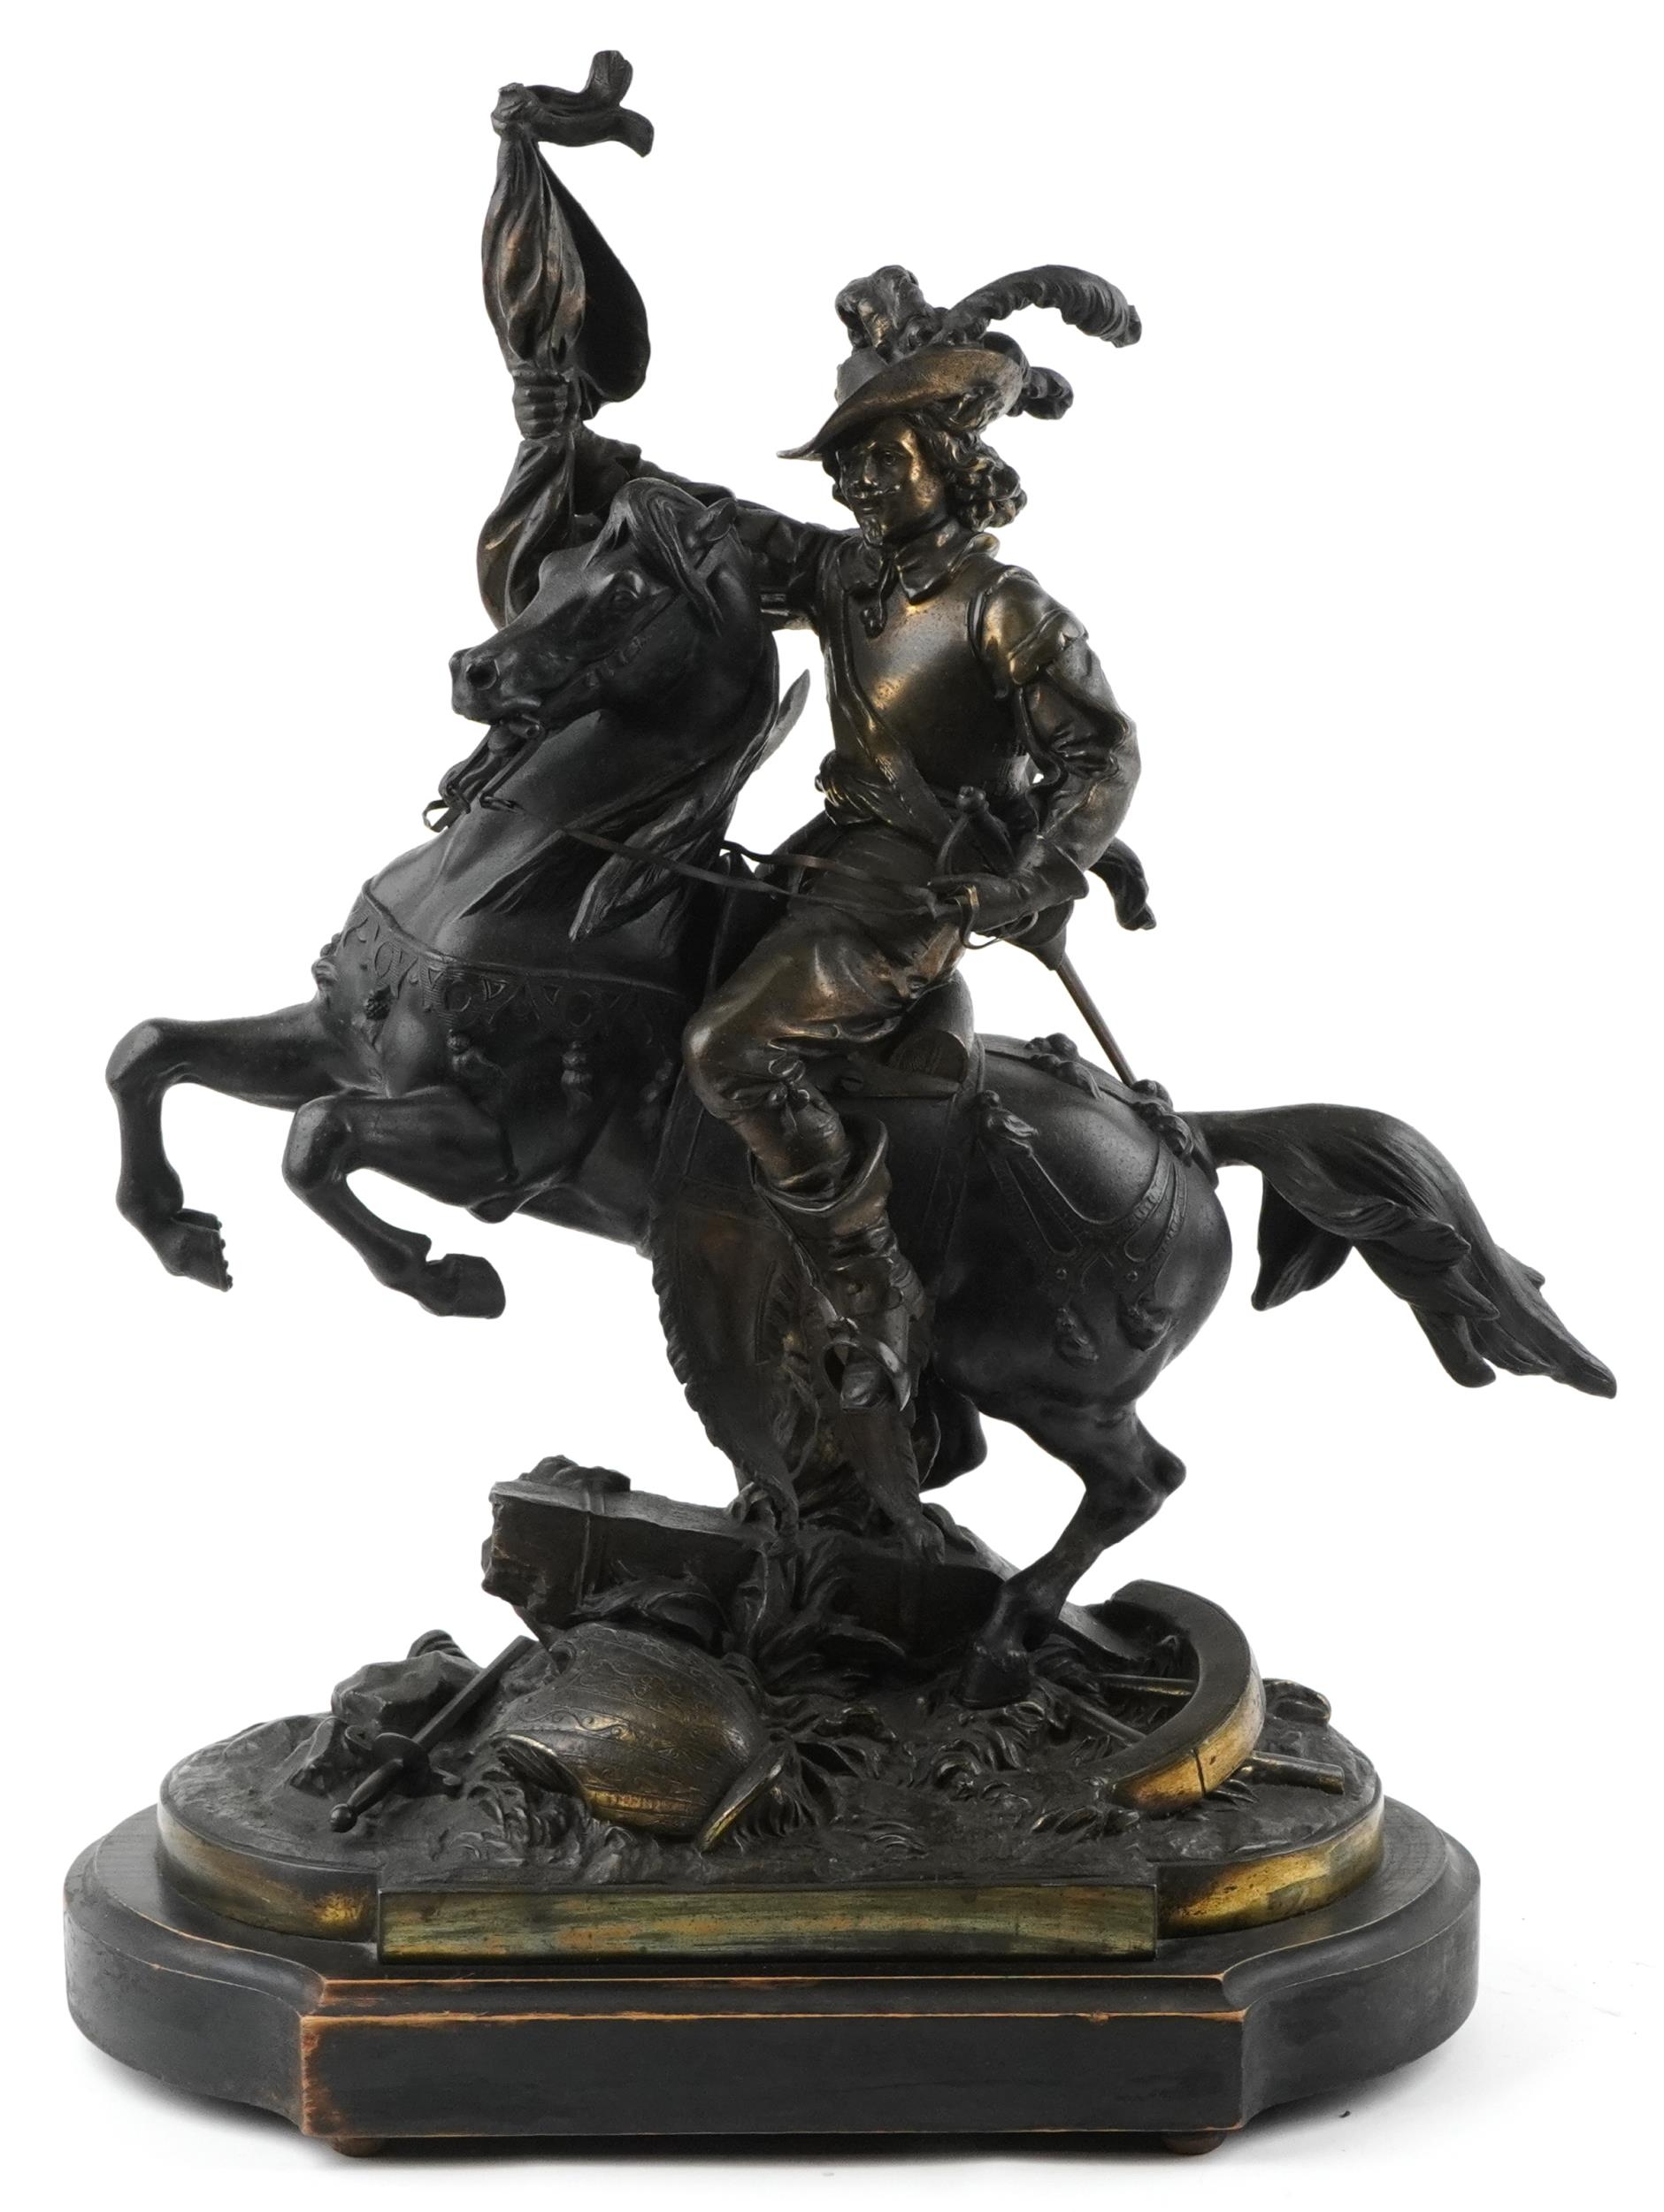 Large 19th century classical patinated spelter sculpture of a Cavalier on horseback raised on a